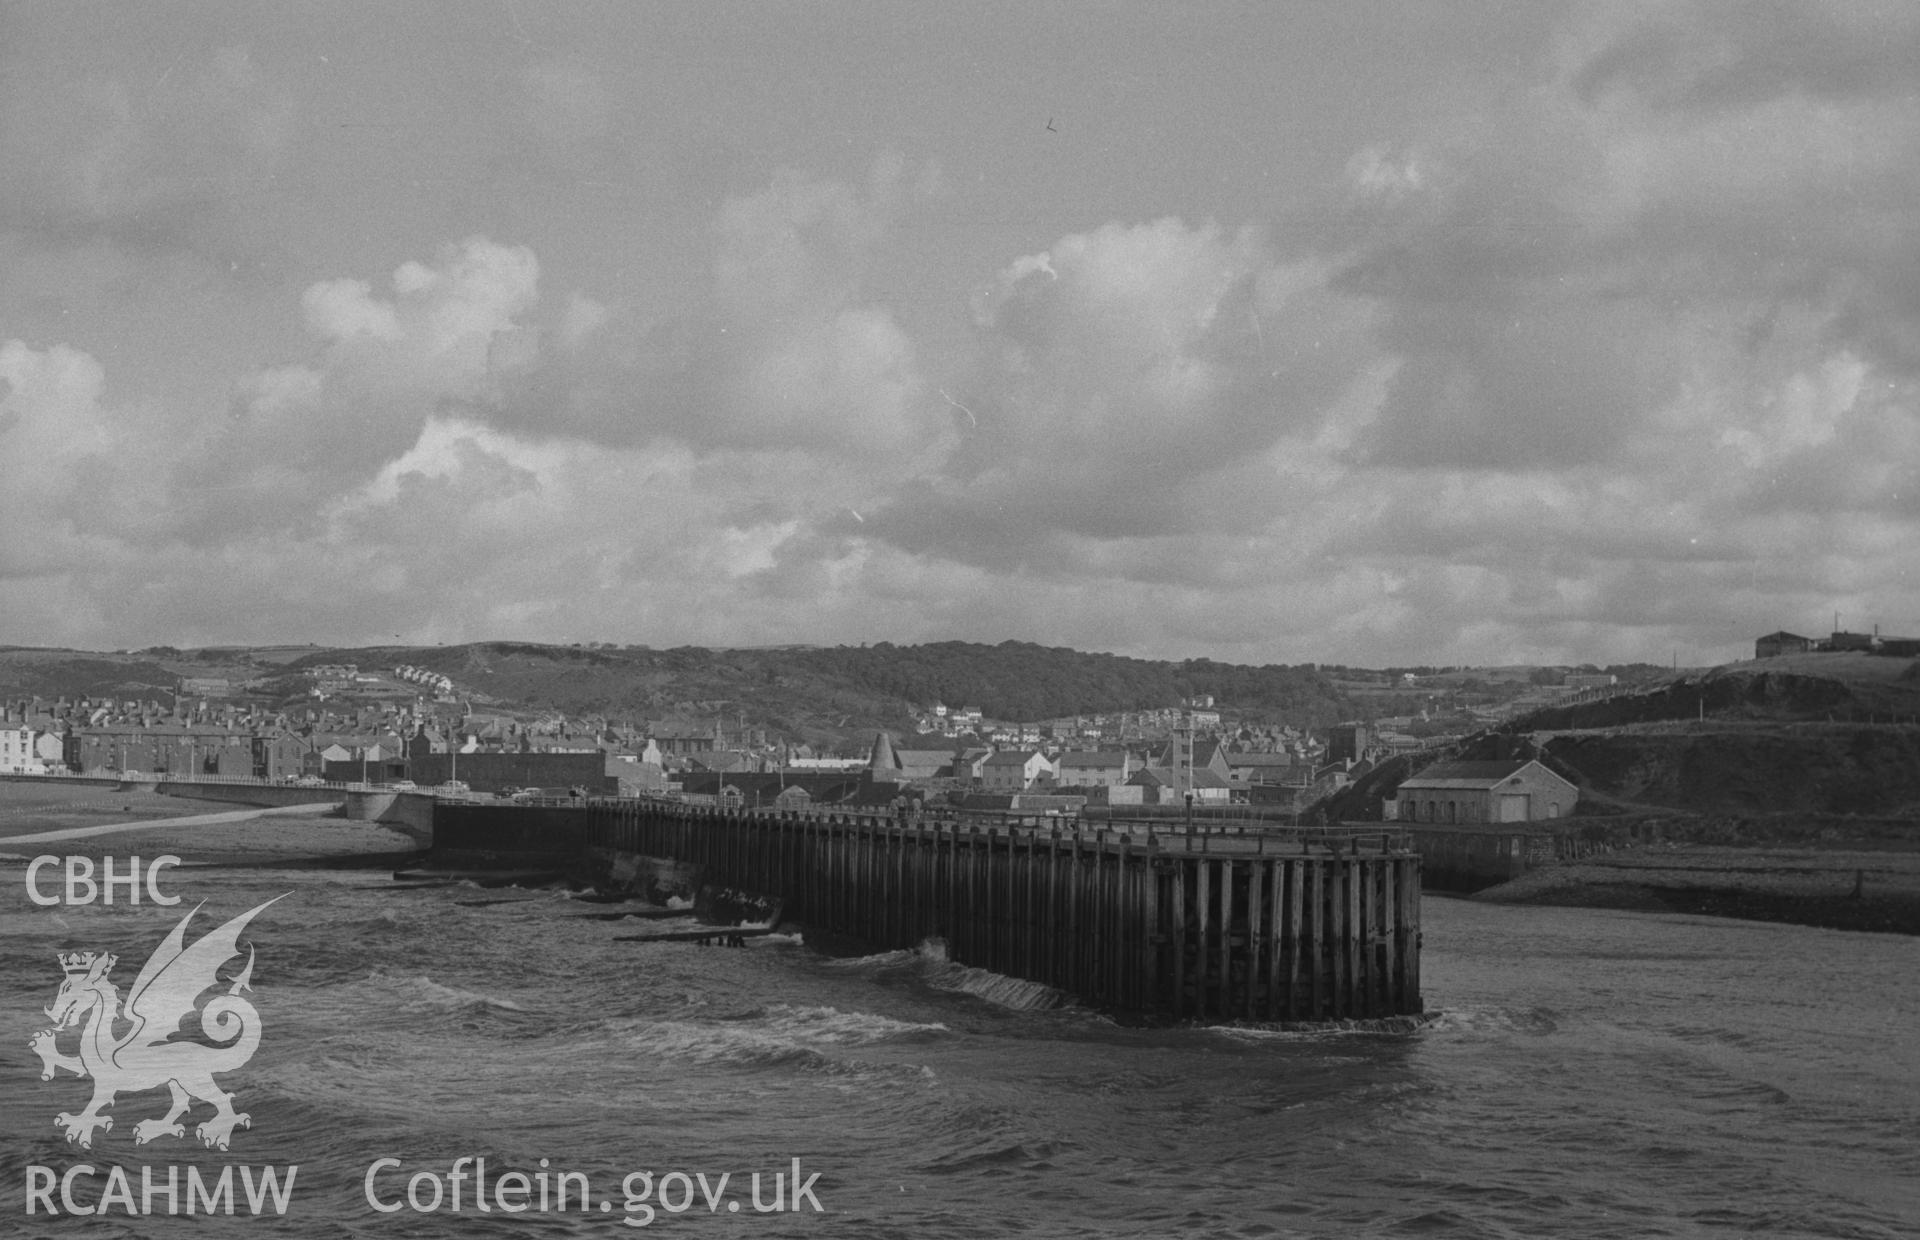 Digital copy of a black and white negative showing view of Aberystwyth jetty from the stone pier at Tanybwlch Beach. Photographed by Arthur O. Chater in September 1964 from Grid Reference SN 5781 8080, looking north east.